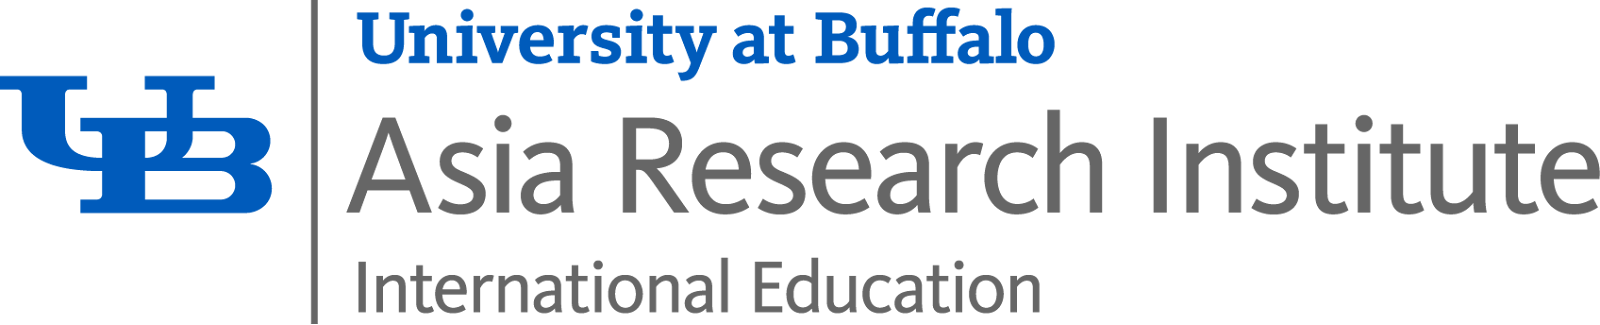 Logo for University at Buffalo Asian Research Institute | Office of International Education